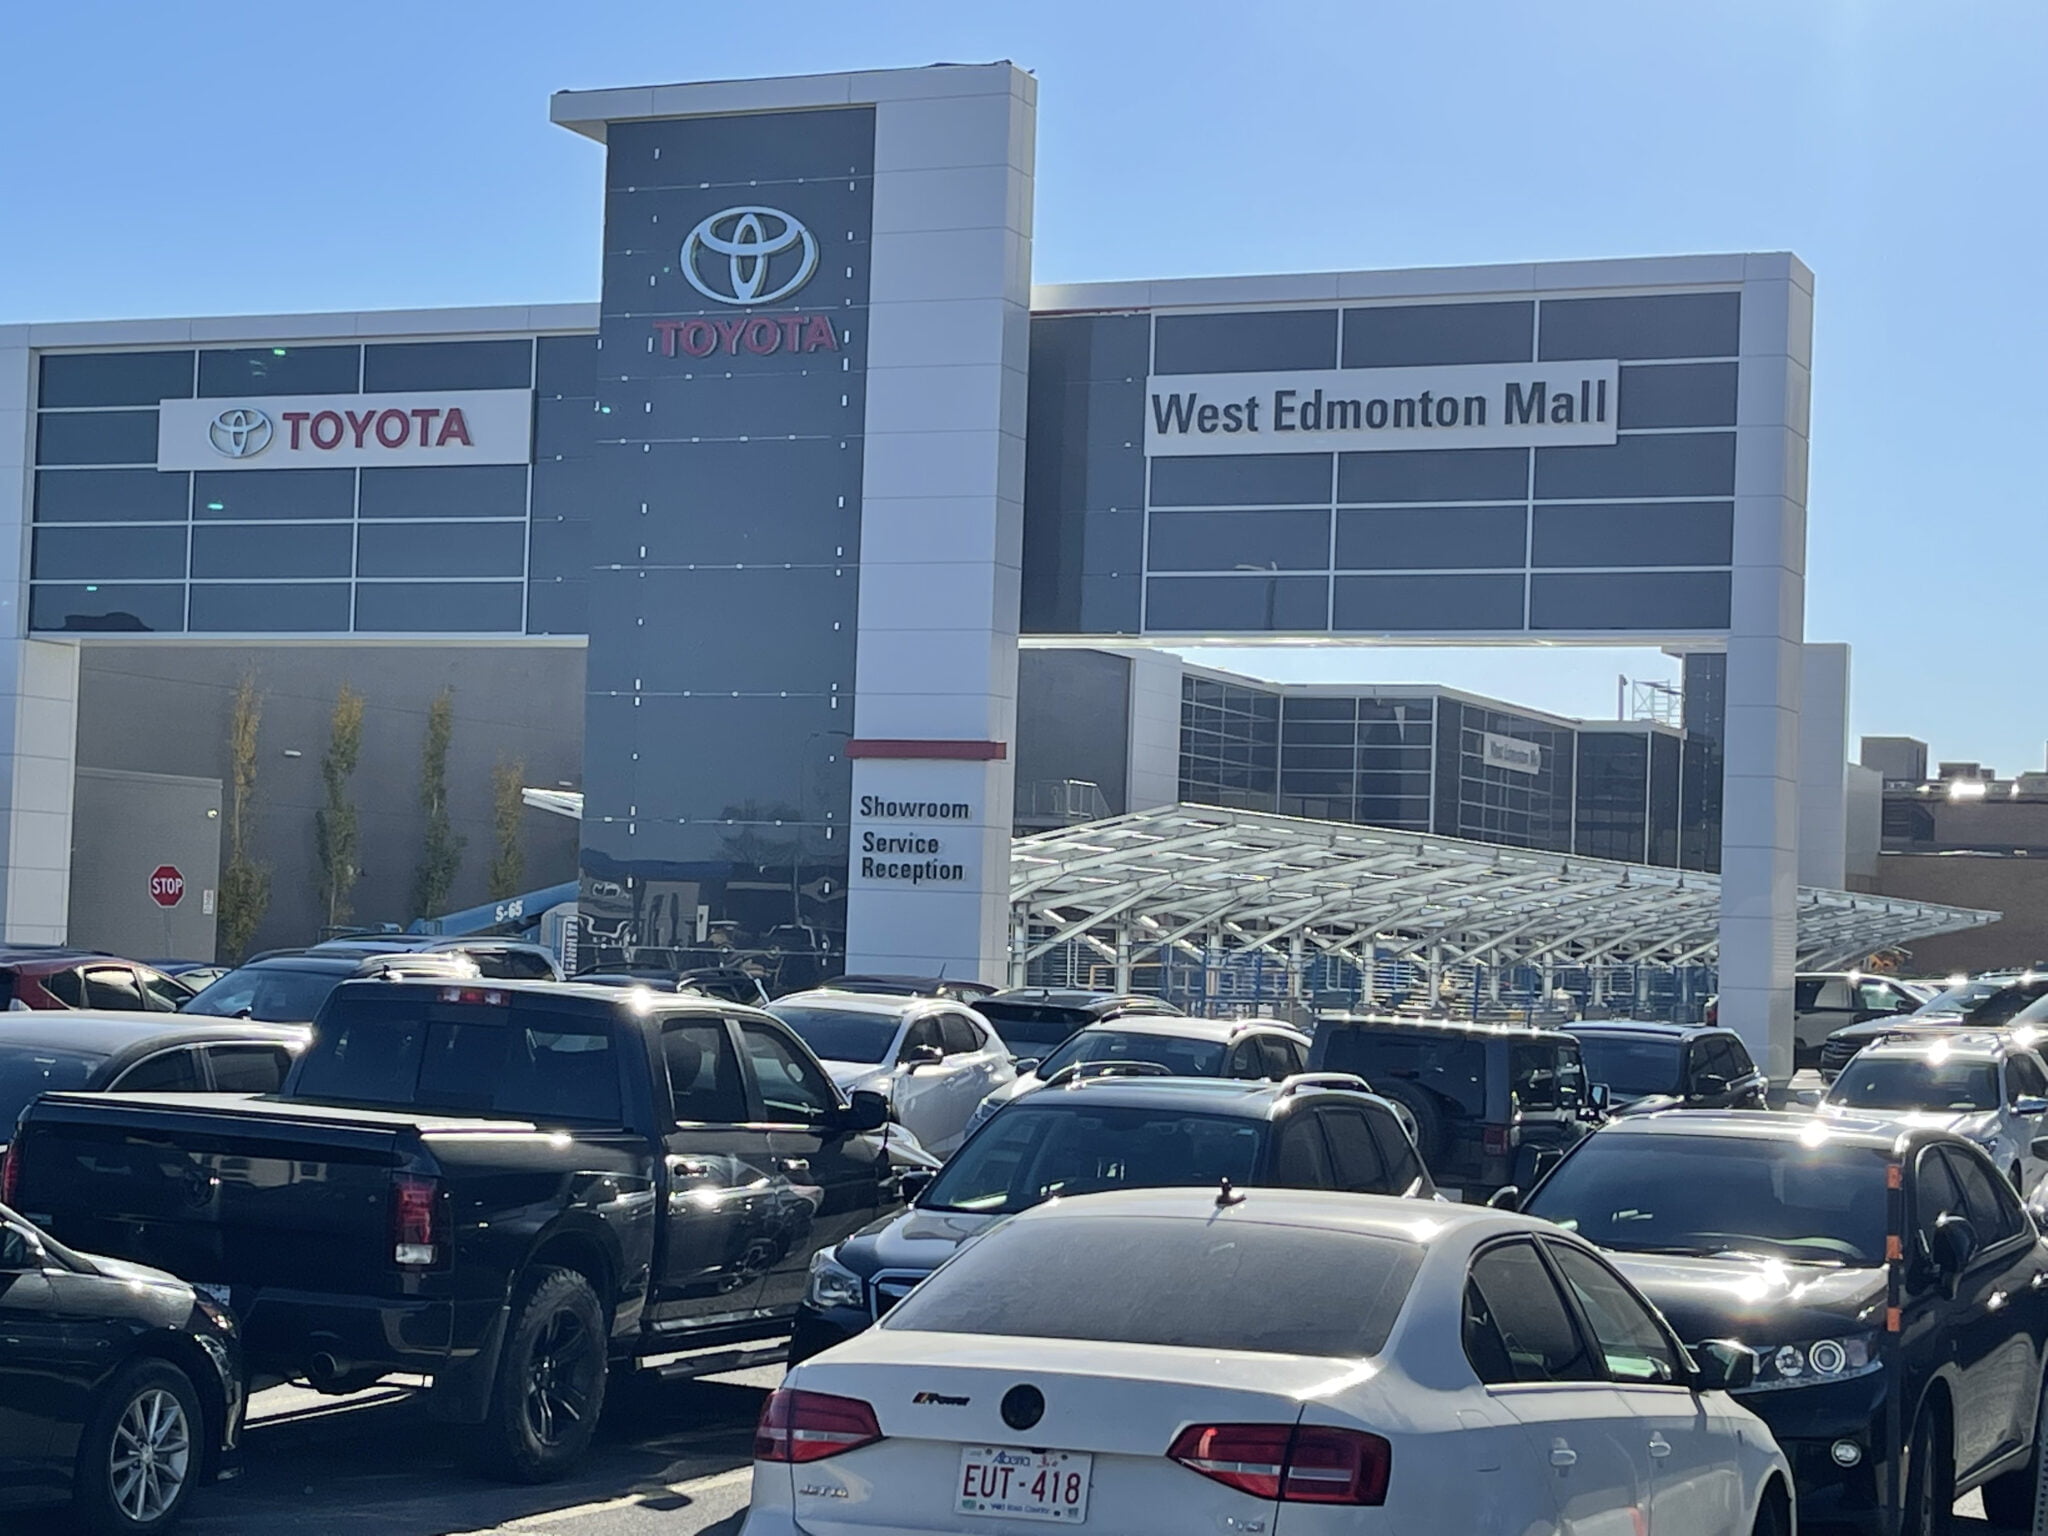 Toyota Opens World's Largest InMall Service Dealership at West